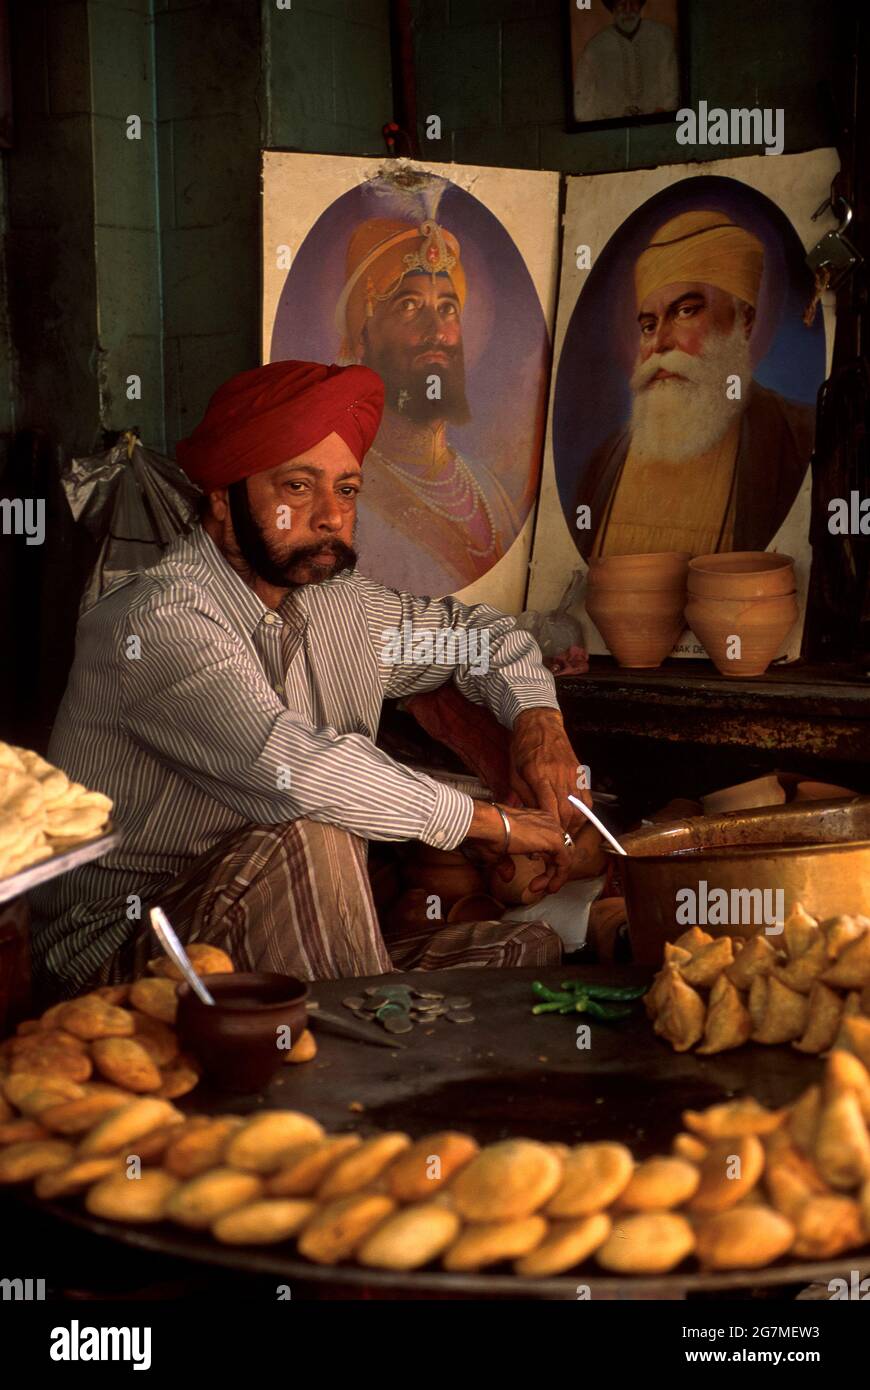 A Sikh man selling bhajis from his street stall Stock Photo